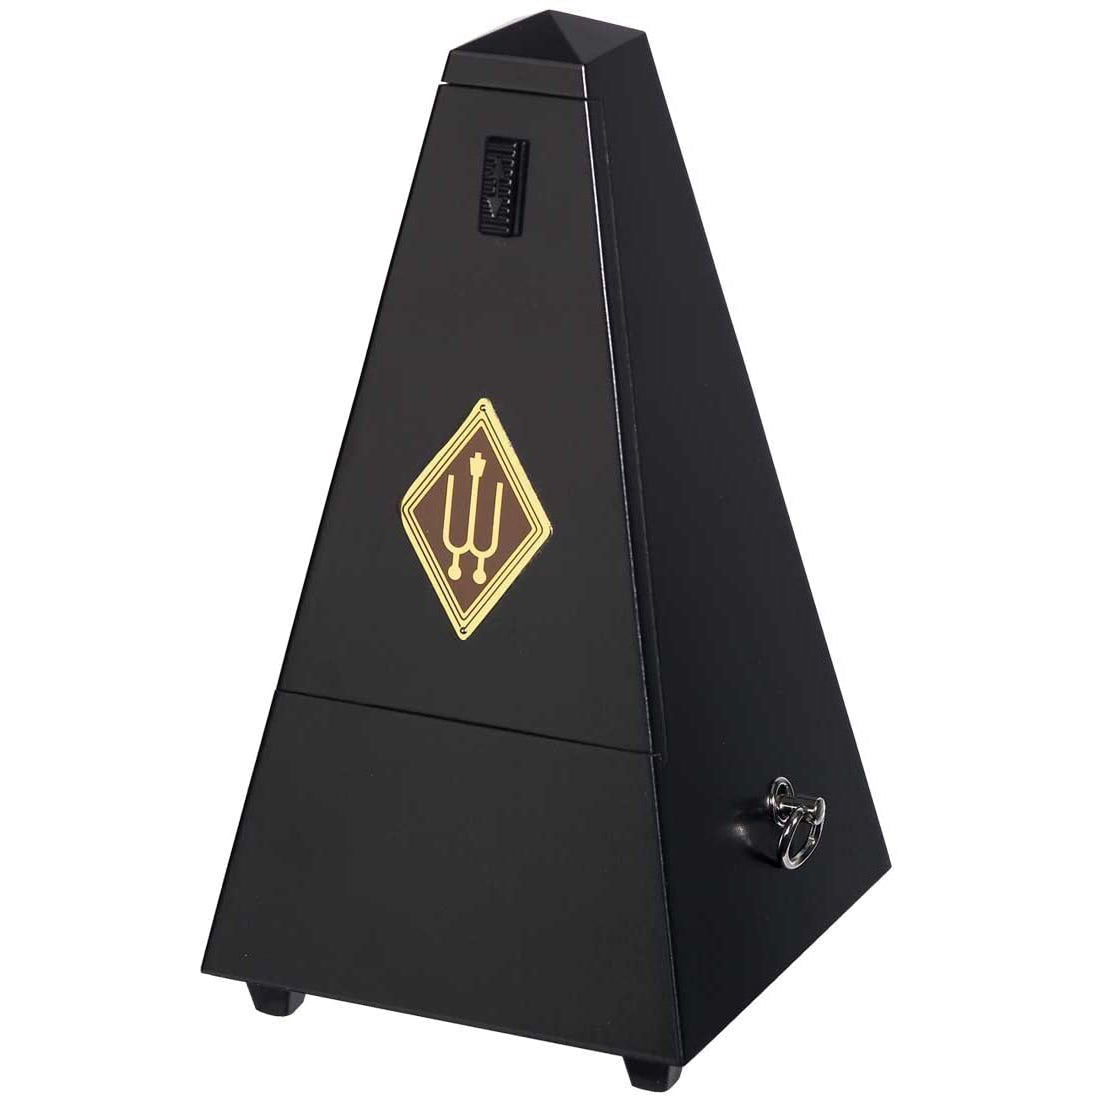 Wittner 806m Wooden Casing Metronome in Black without Bell